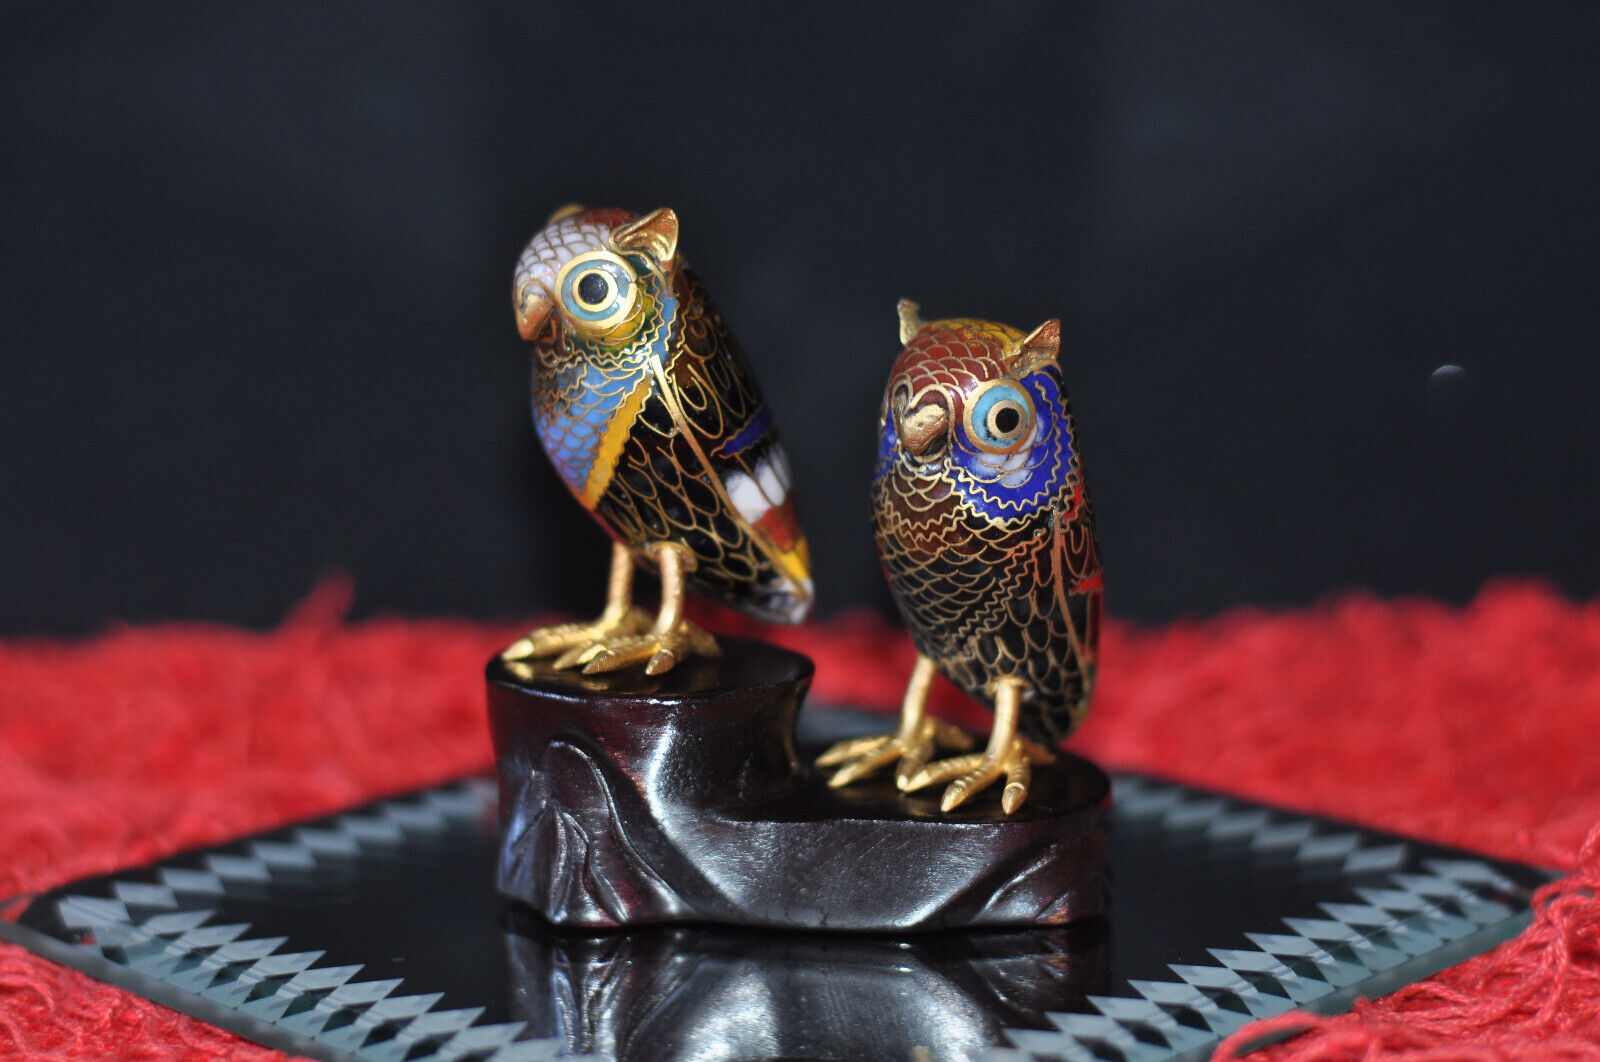 Fabulous Pair of Miniature Cloisonne Owls on a Stand - 5cm Tall